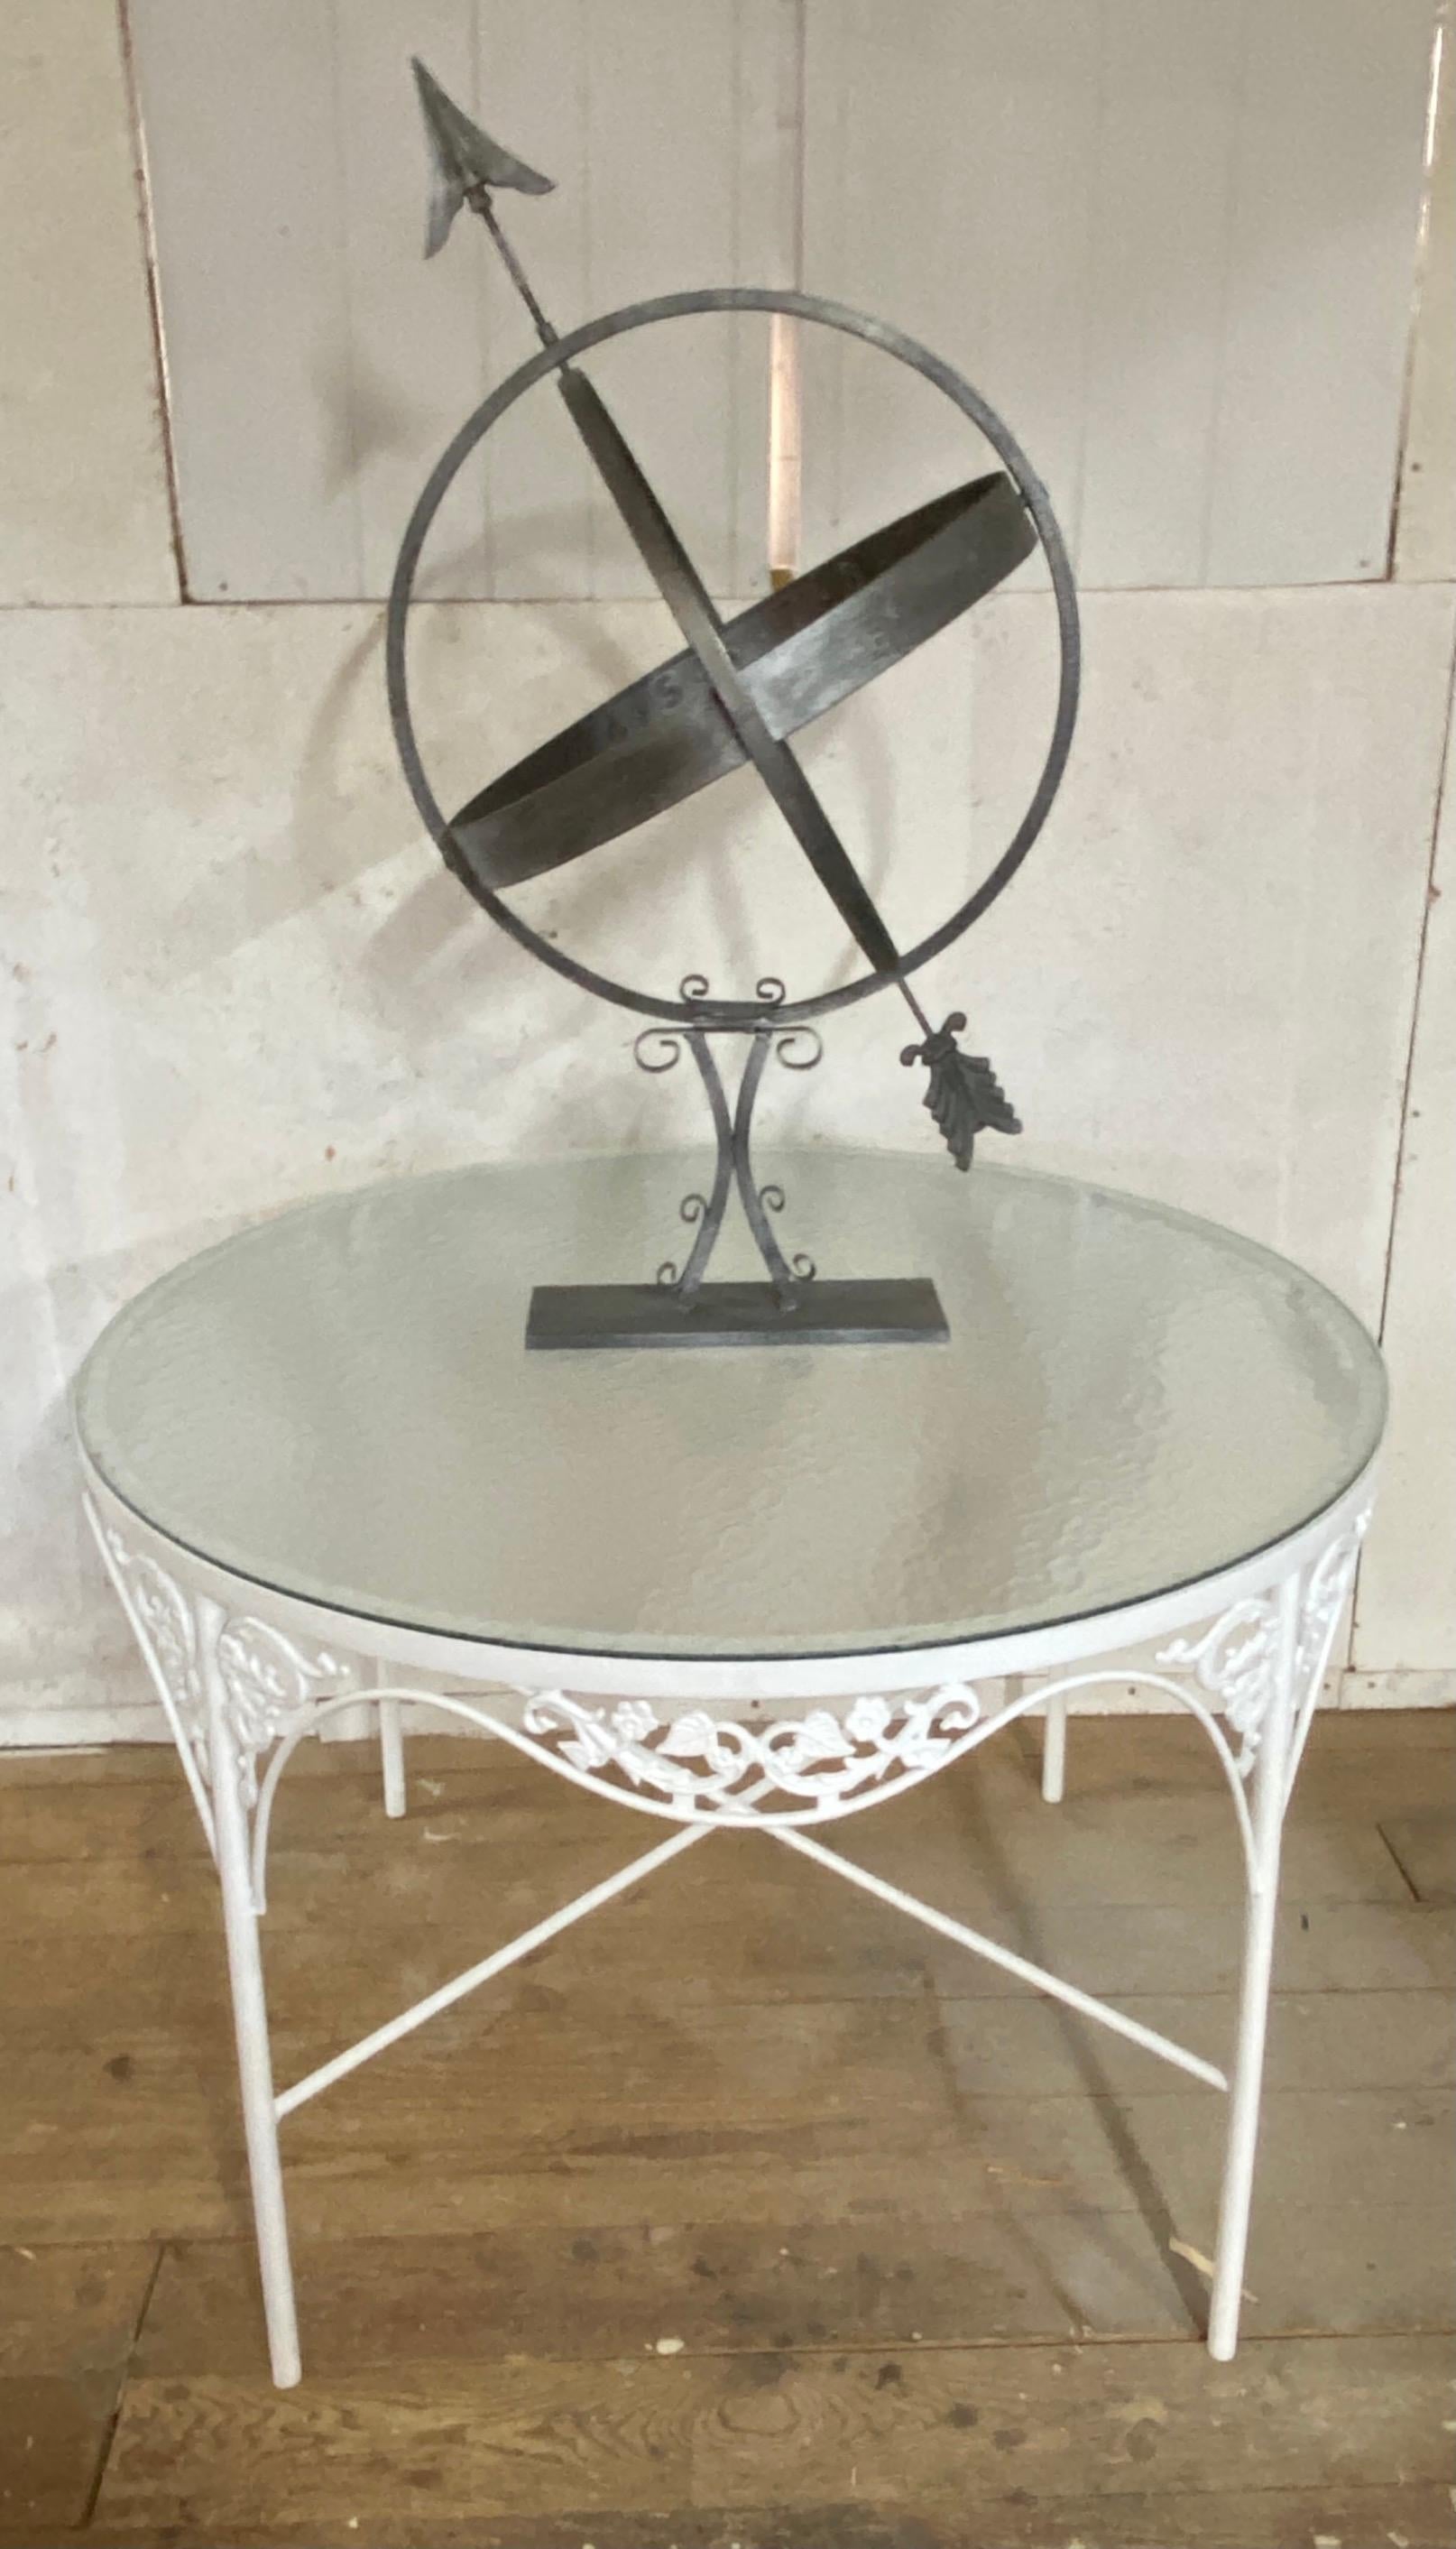 A vintage Swedish armillary sundial, accented with numeric banding around the sphere's center perimeter can be placed on plinth or a table to make a striking addition to any garden landscape or in a room. The sundial has a silver antiqued